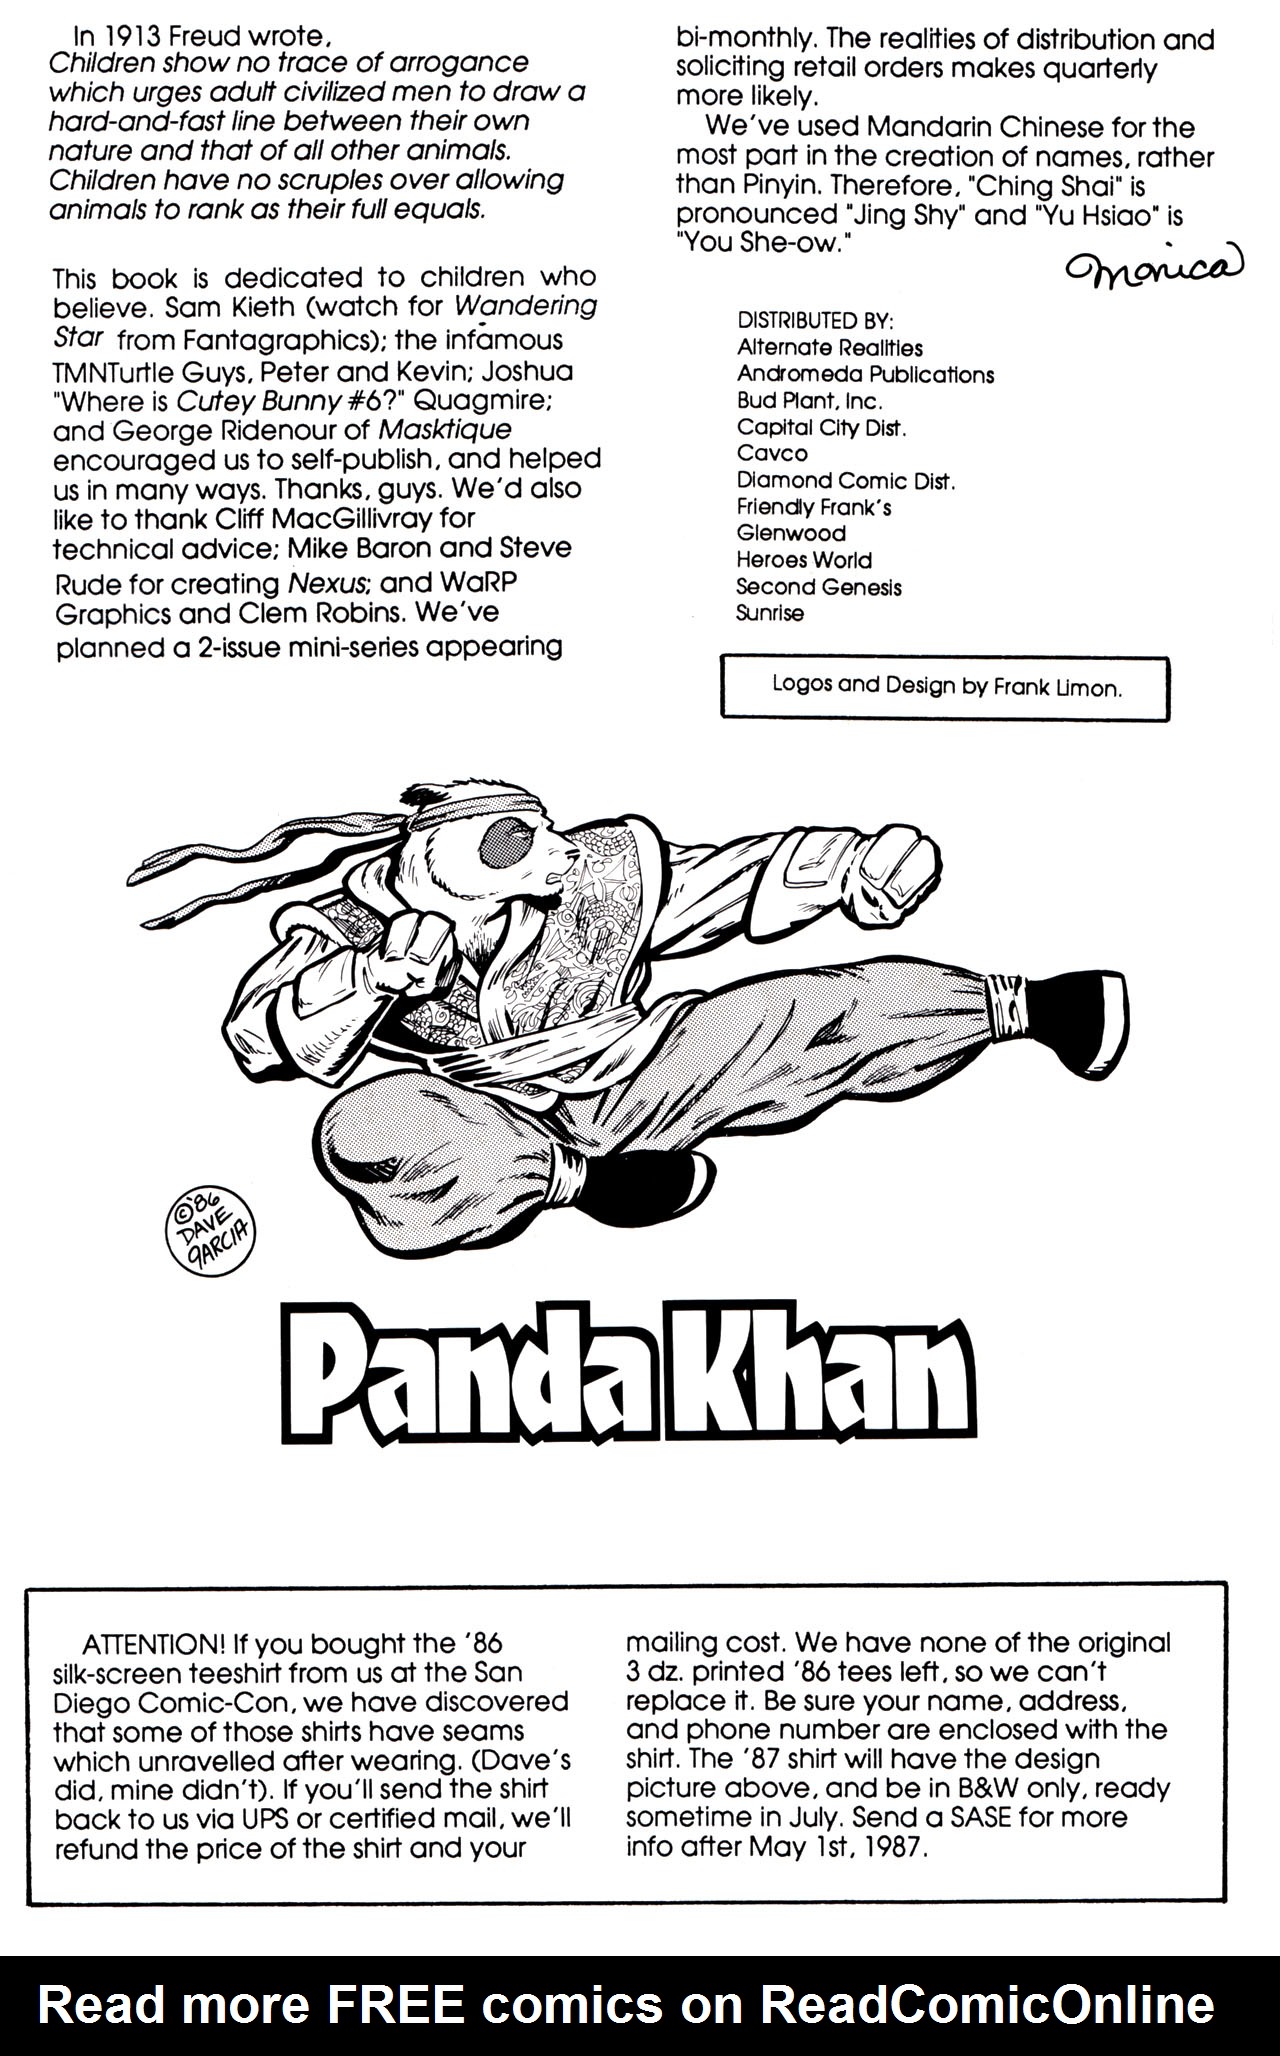 Read online The Chronicles of Panda Khan comic -  Issue #1 - 36